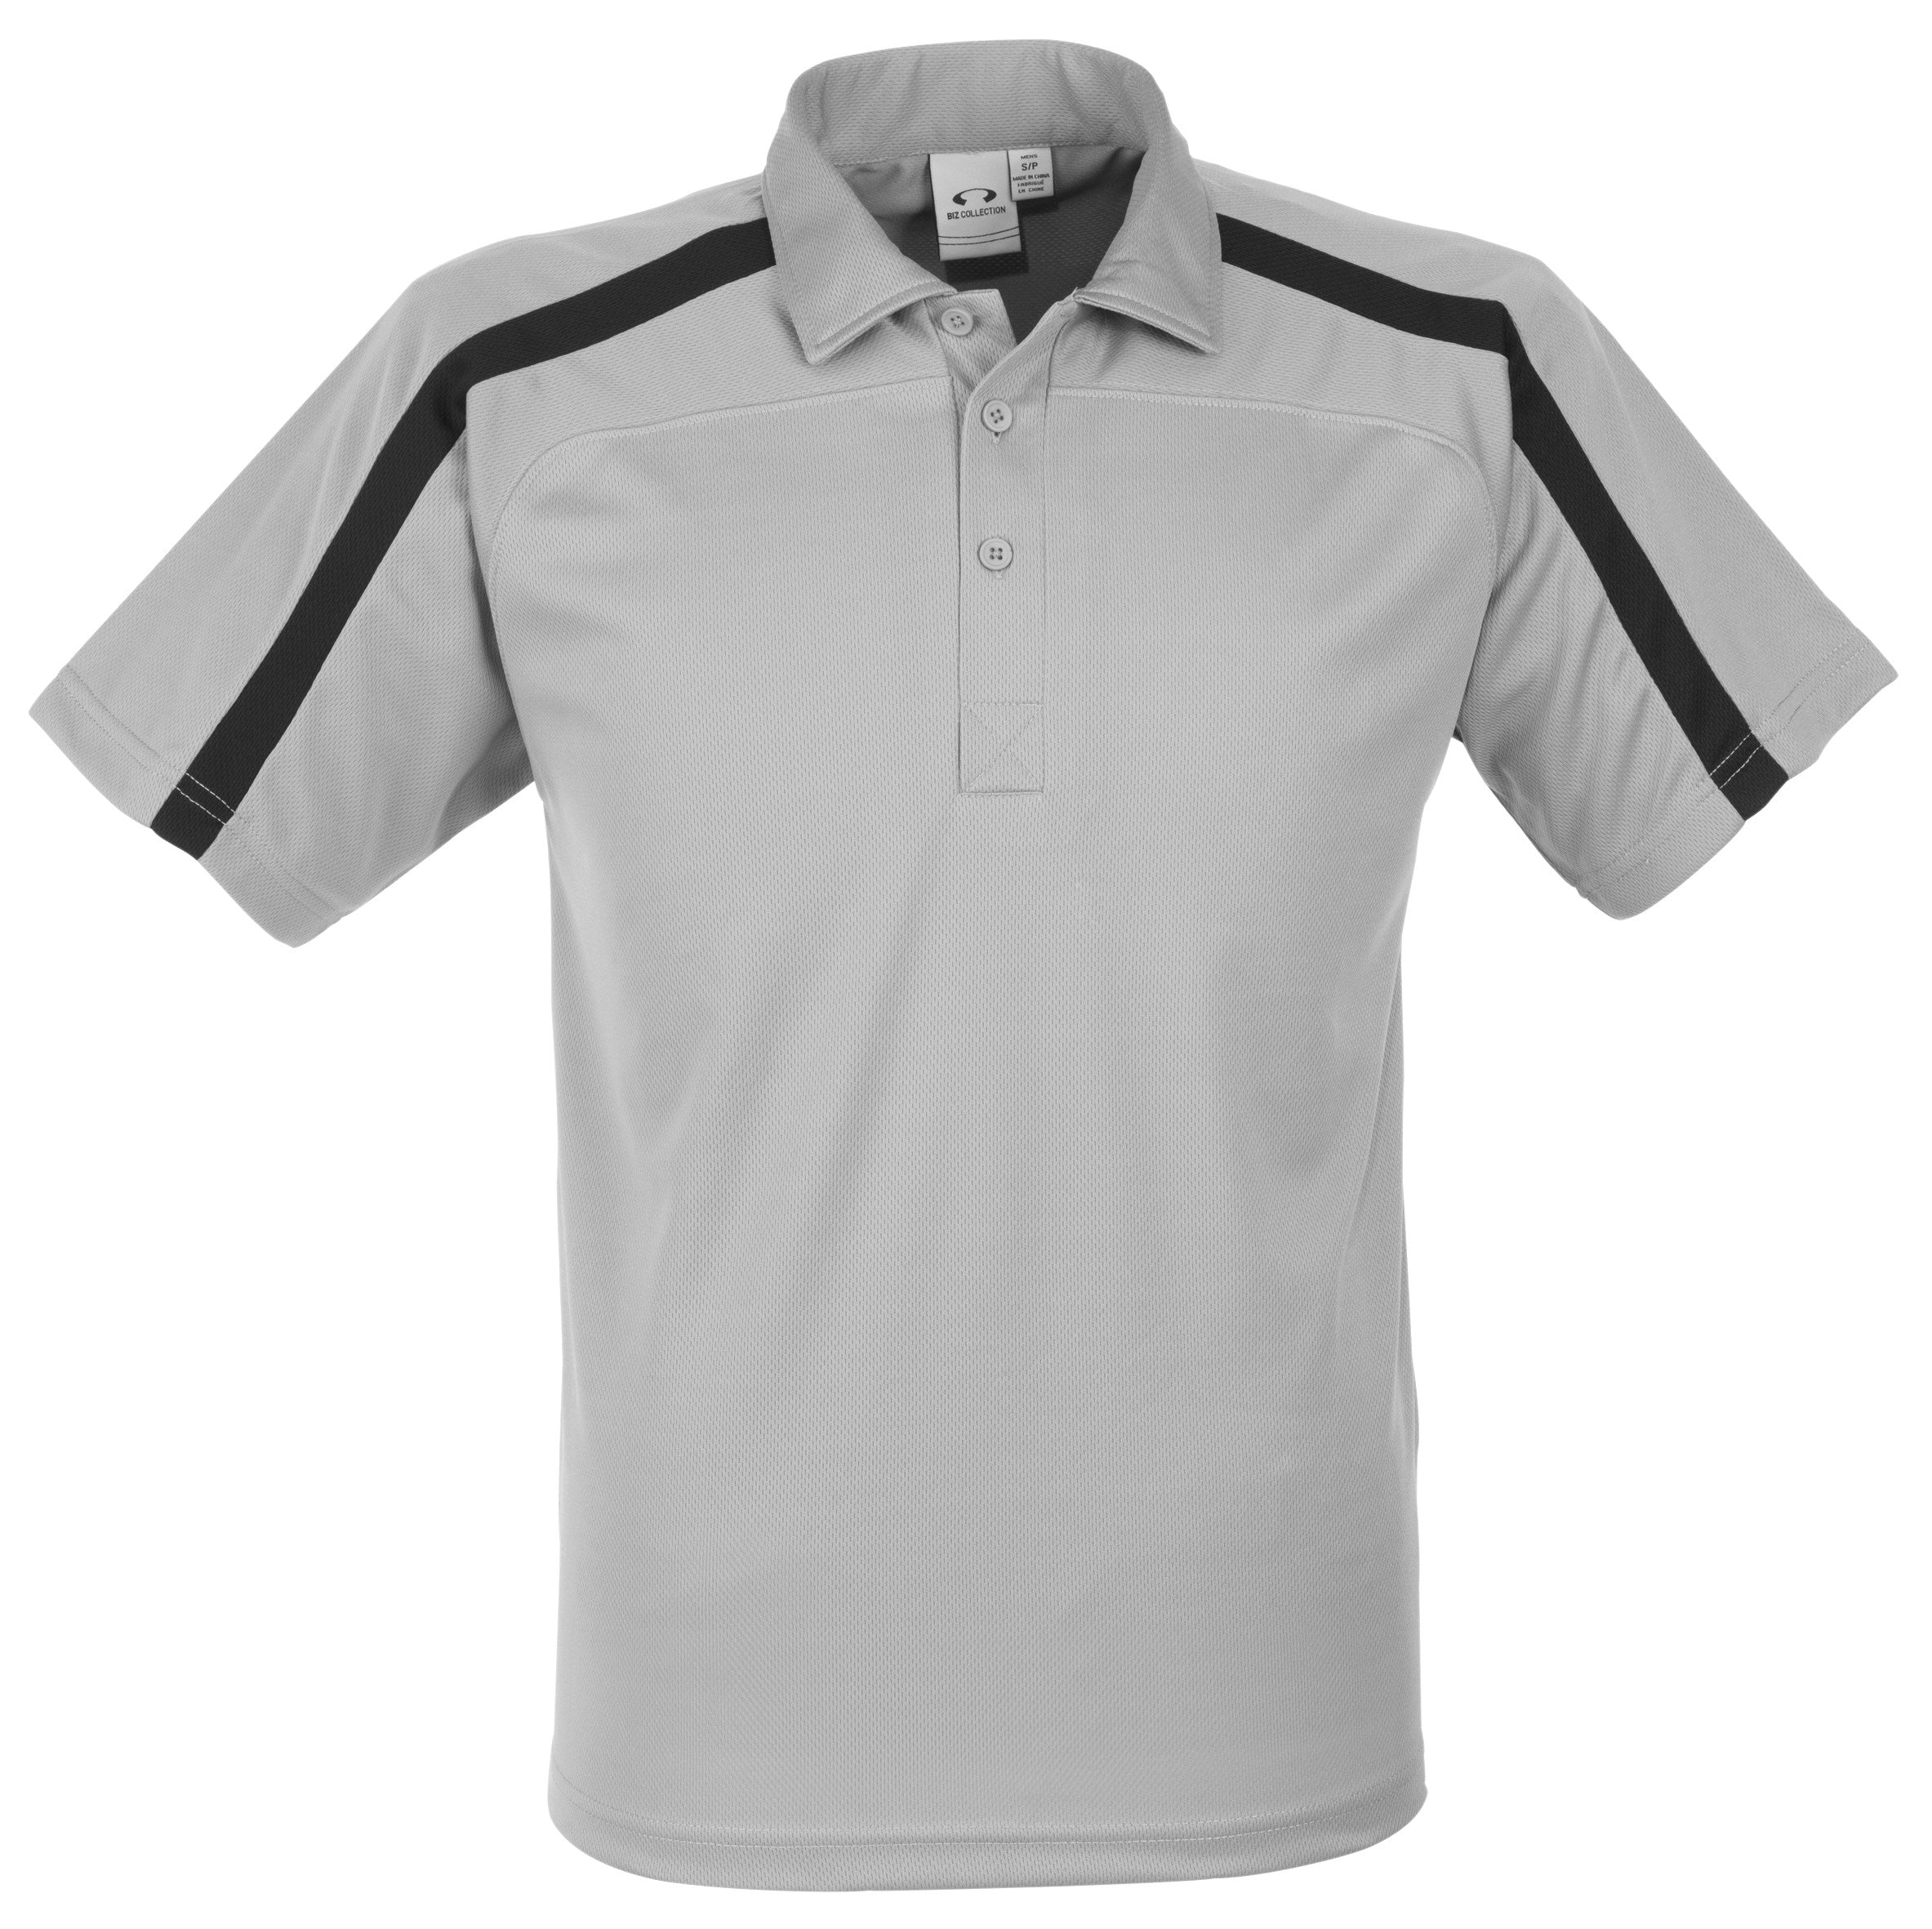 Mens Monte Carlo Golf Shirt - Navy Only-L-Grey-GY